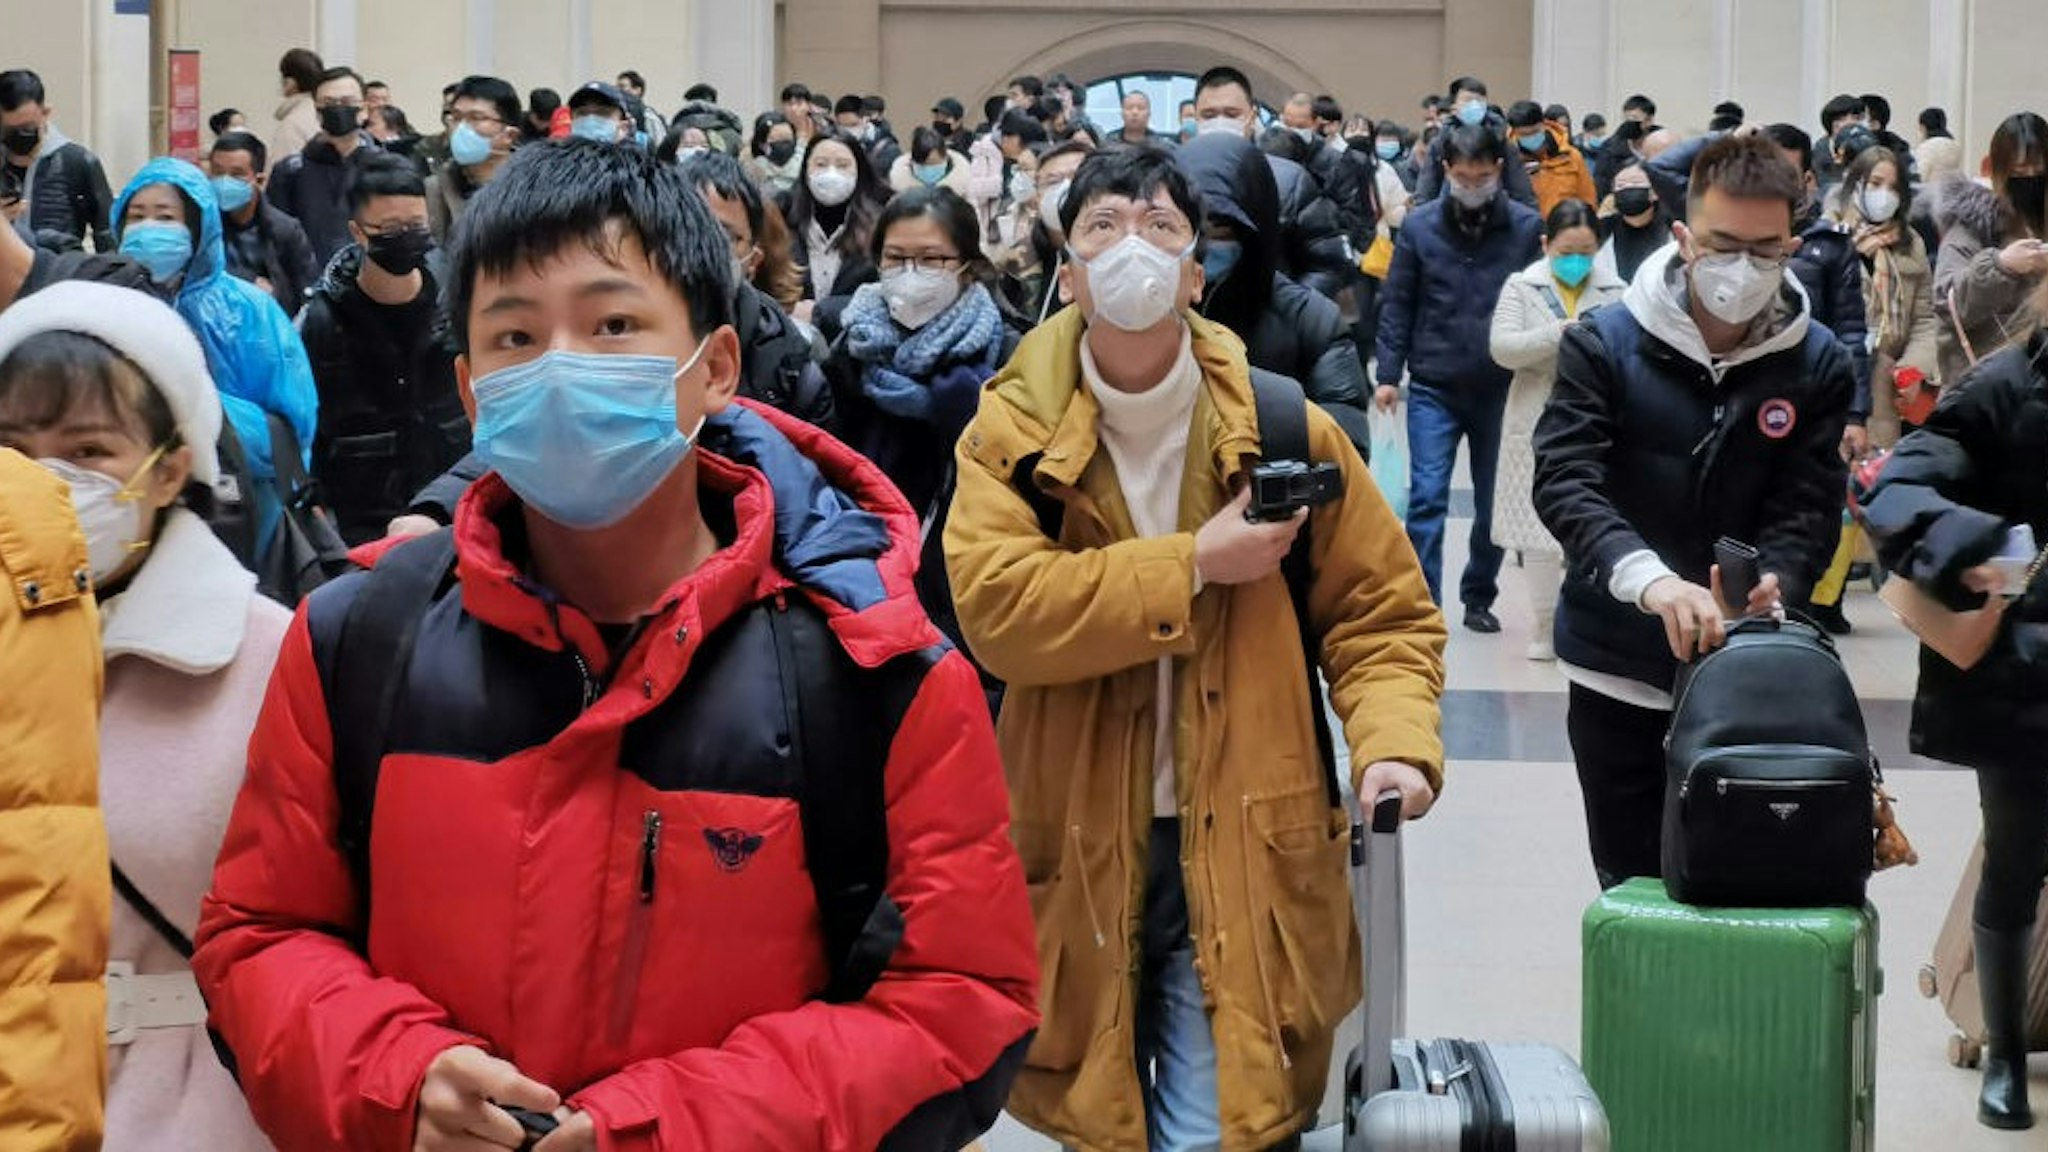 WUHAN, CHINA - JANUARY 22: People wear face masks as they wait at Hankou Railway Station on January 22, 2020 in Wuhan, China. A new infectious coronavirus known as "2019-nCoV" was discovered in Wuhan last week. Health officials stepped up efforts to contain the spread of the pneumonia-like disease which medical experts confirmed can be passed from human to human. Cases have been reported in other countries including the United States,Thailand, Japan, Taiwan, and South Korea. It is reported that Wuhan will suspend all public transportation at 10 AM on January 23, 2020.